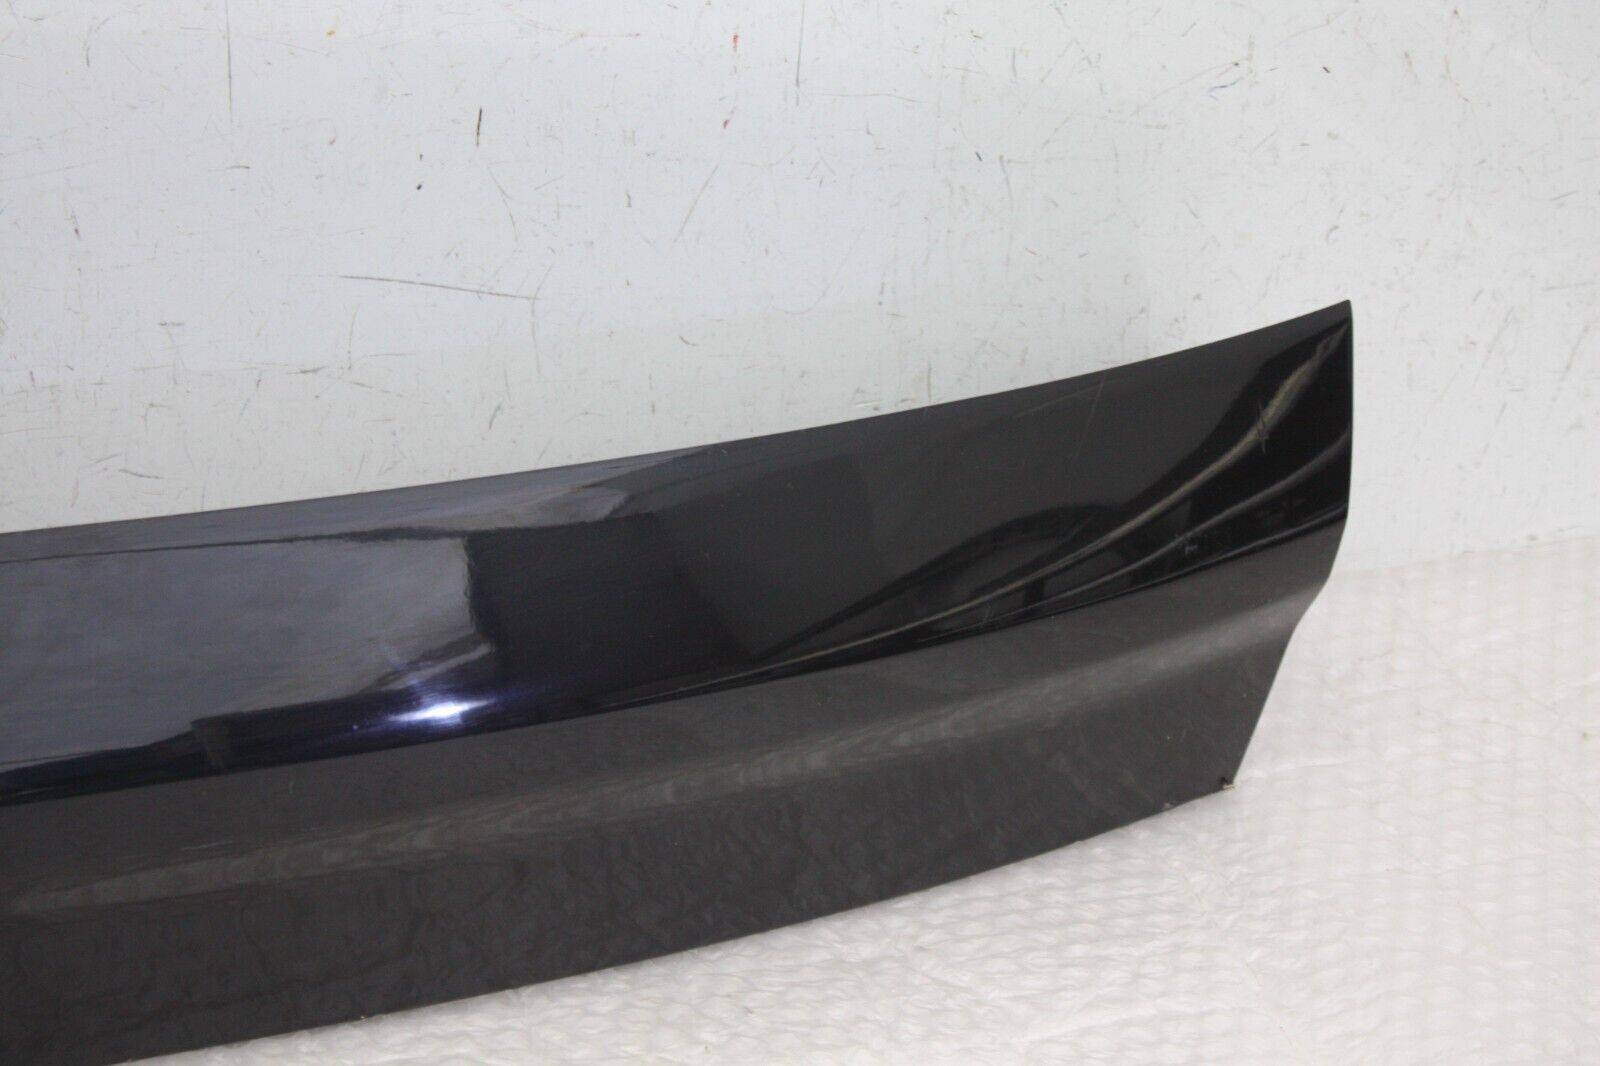 Ford-Kuga-Rear-Tailgate-Boot-Cover-Lower-Section-CJ54-S423A40-Genuine-176362627805-2